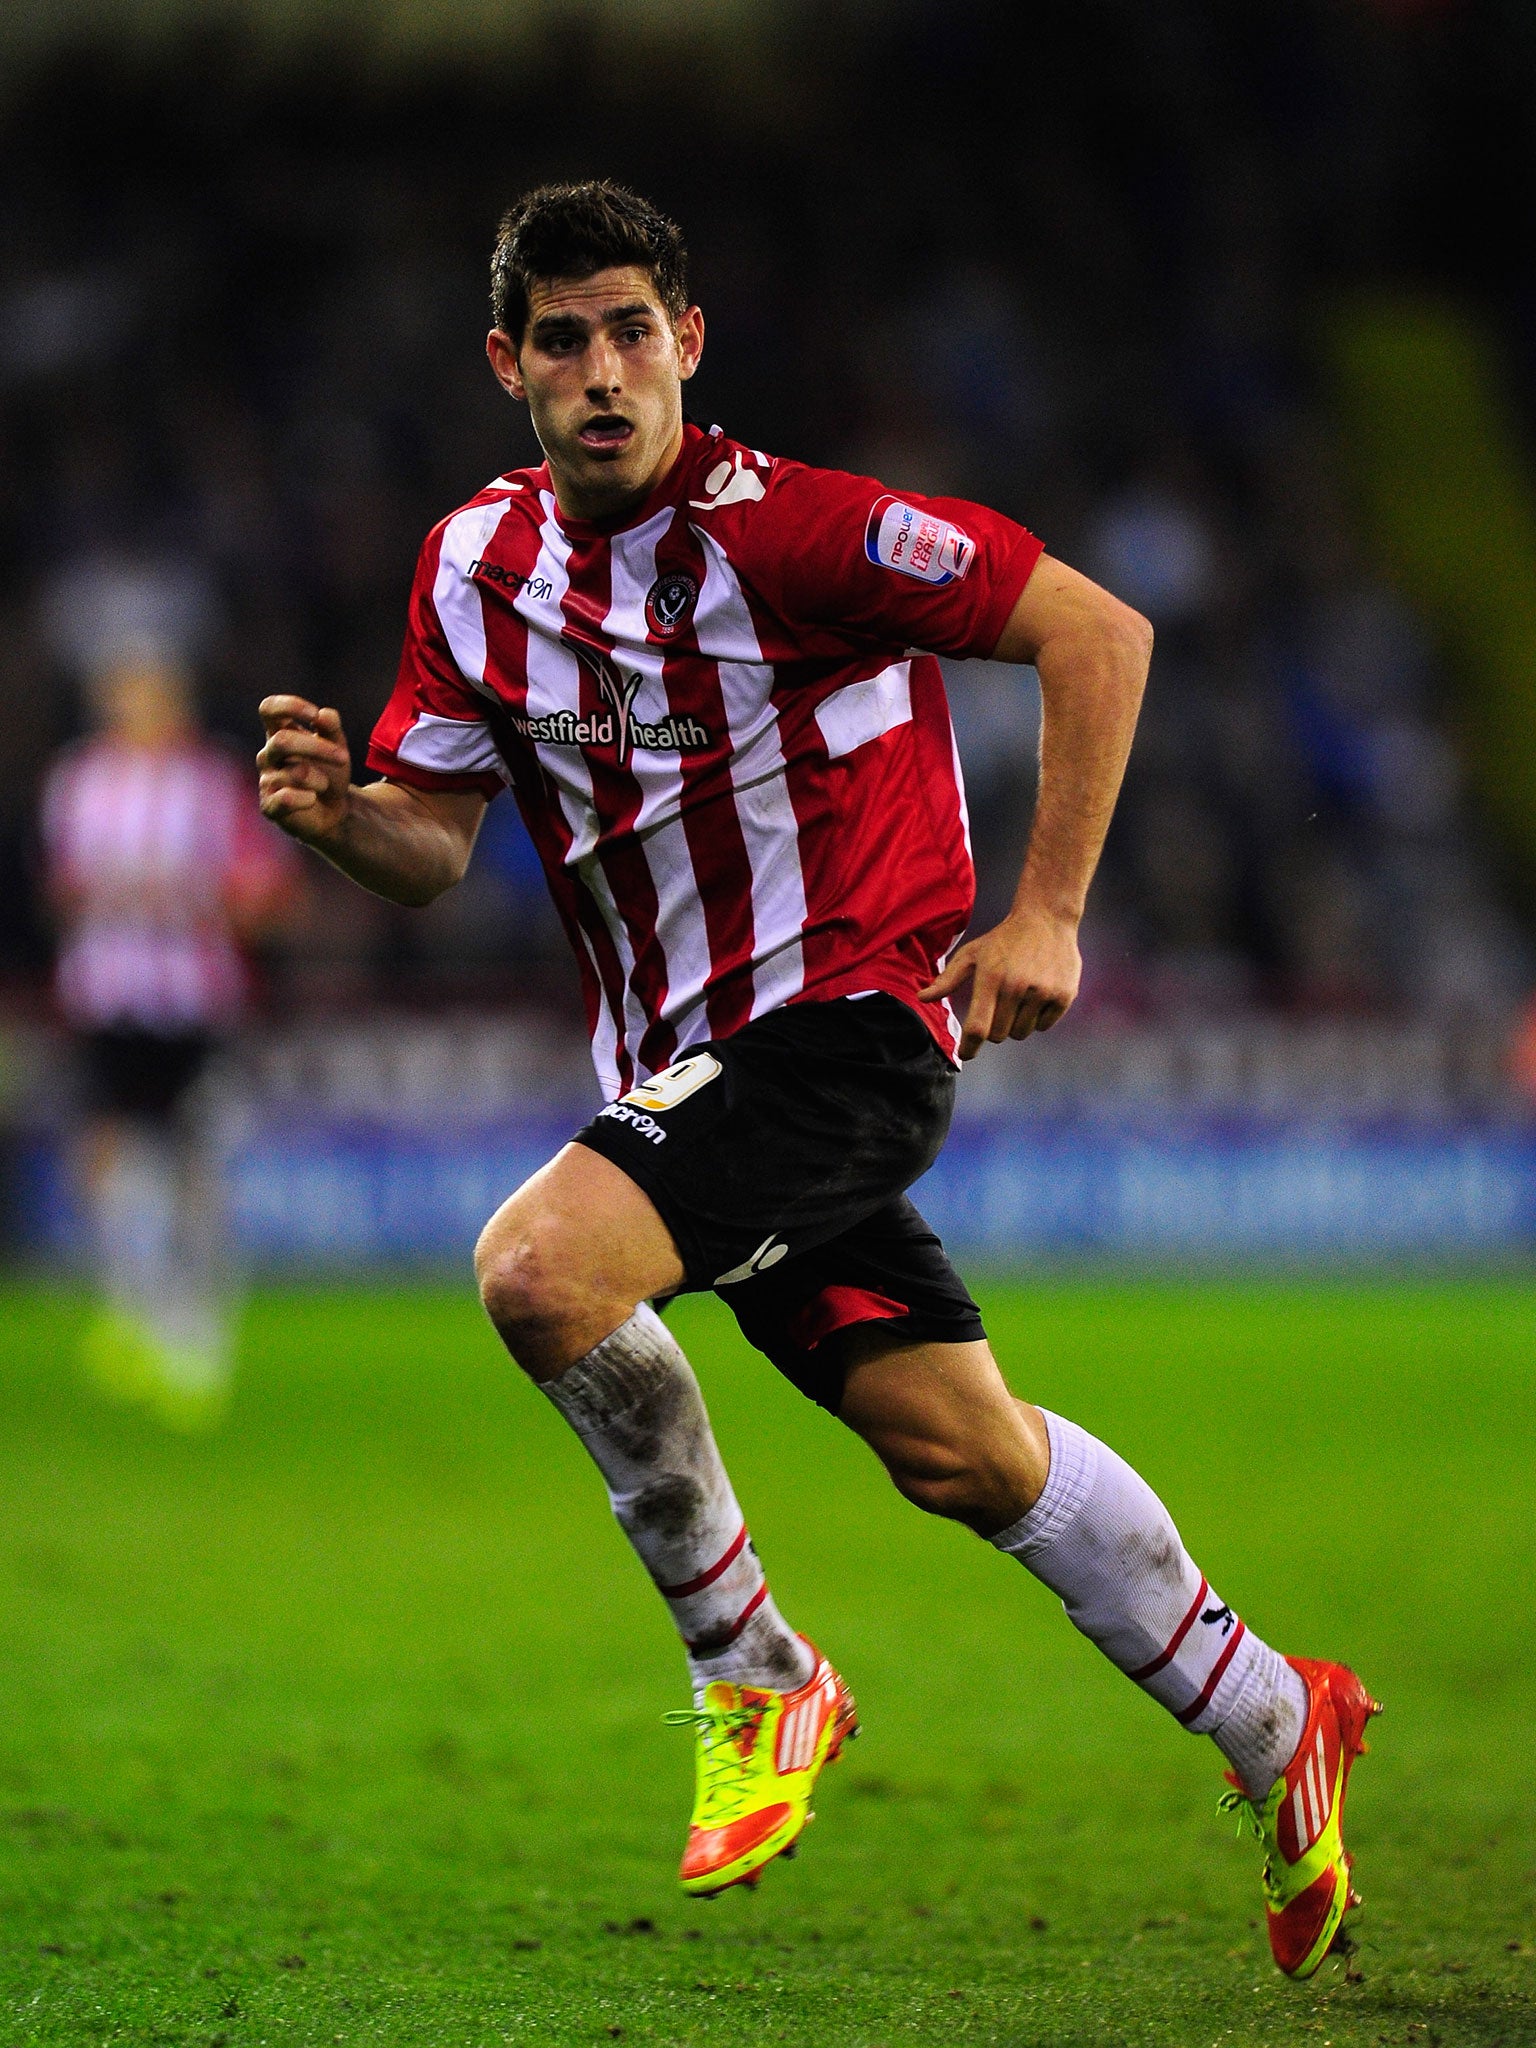 Ched Evans could have used his experiences to educate young men in matters of sexual content